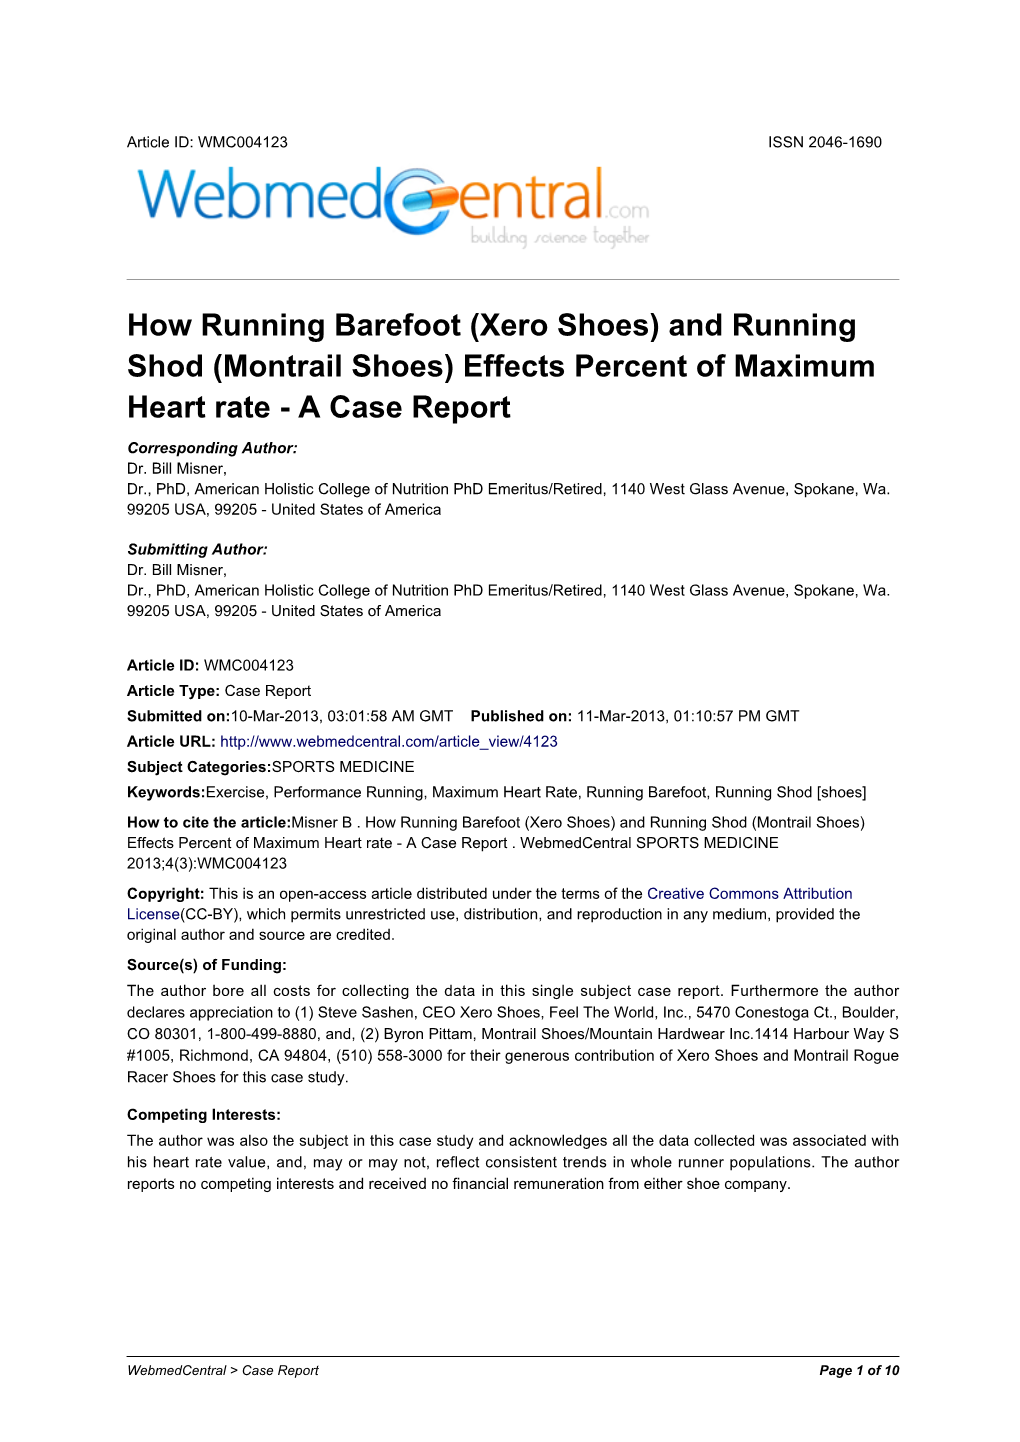 (Montrail Shoes) Effects Percent of Maximum Heart Rate - a Case Report